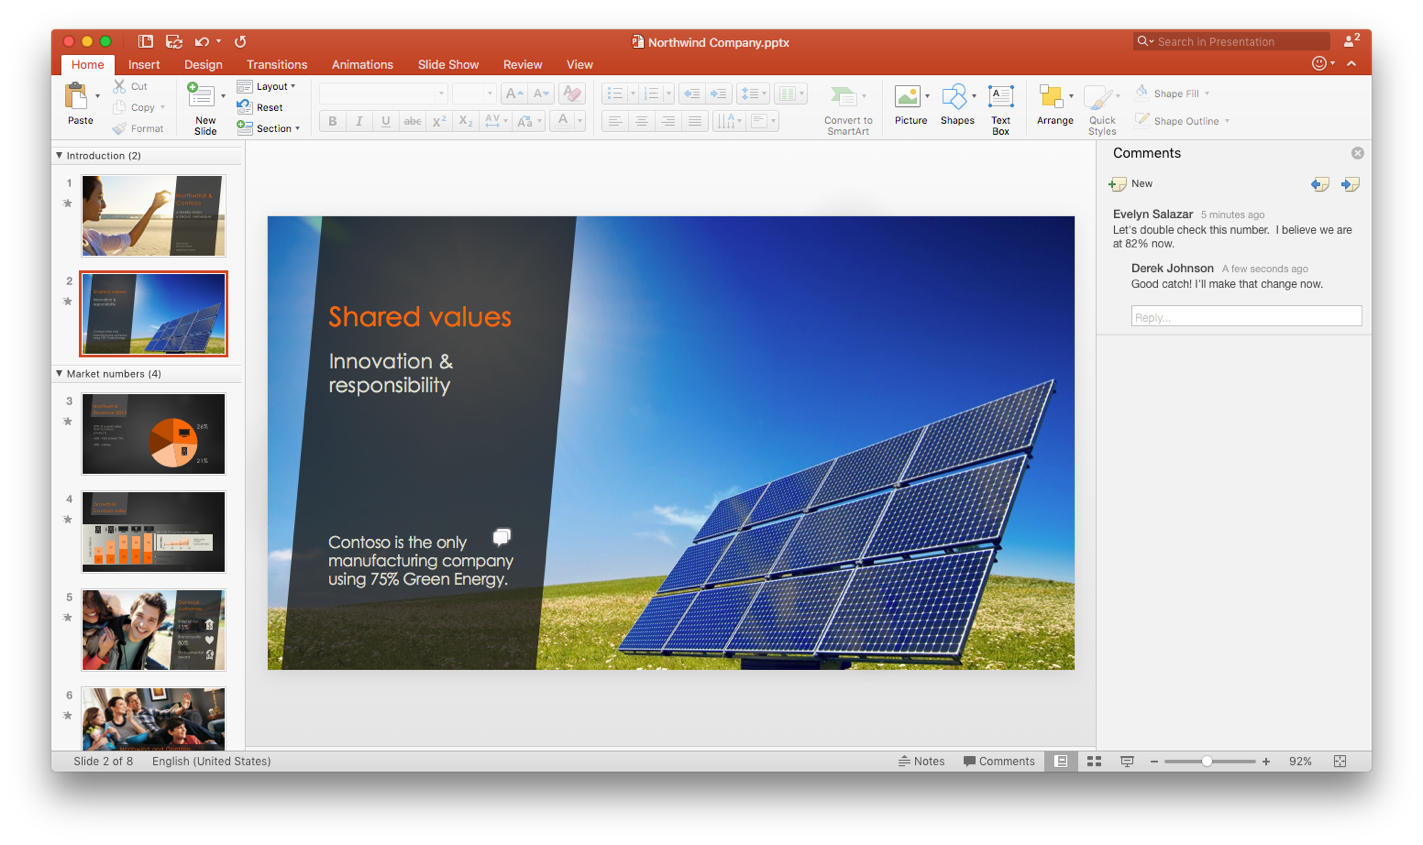 Microsoft powerpoint download